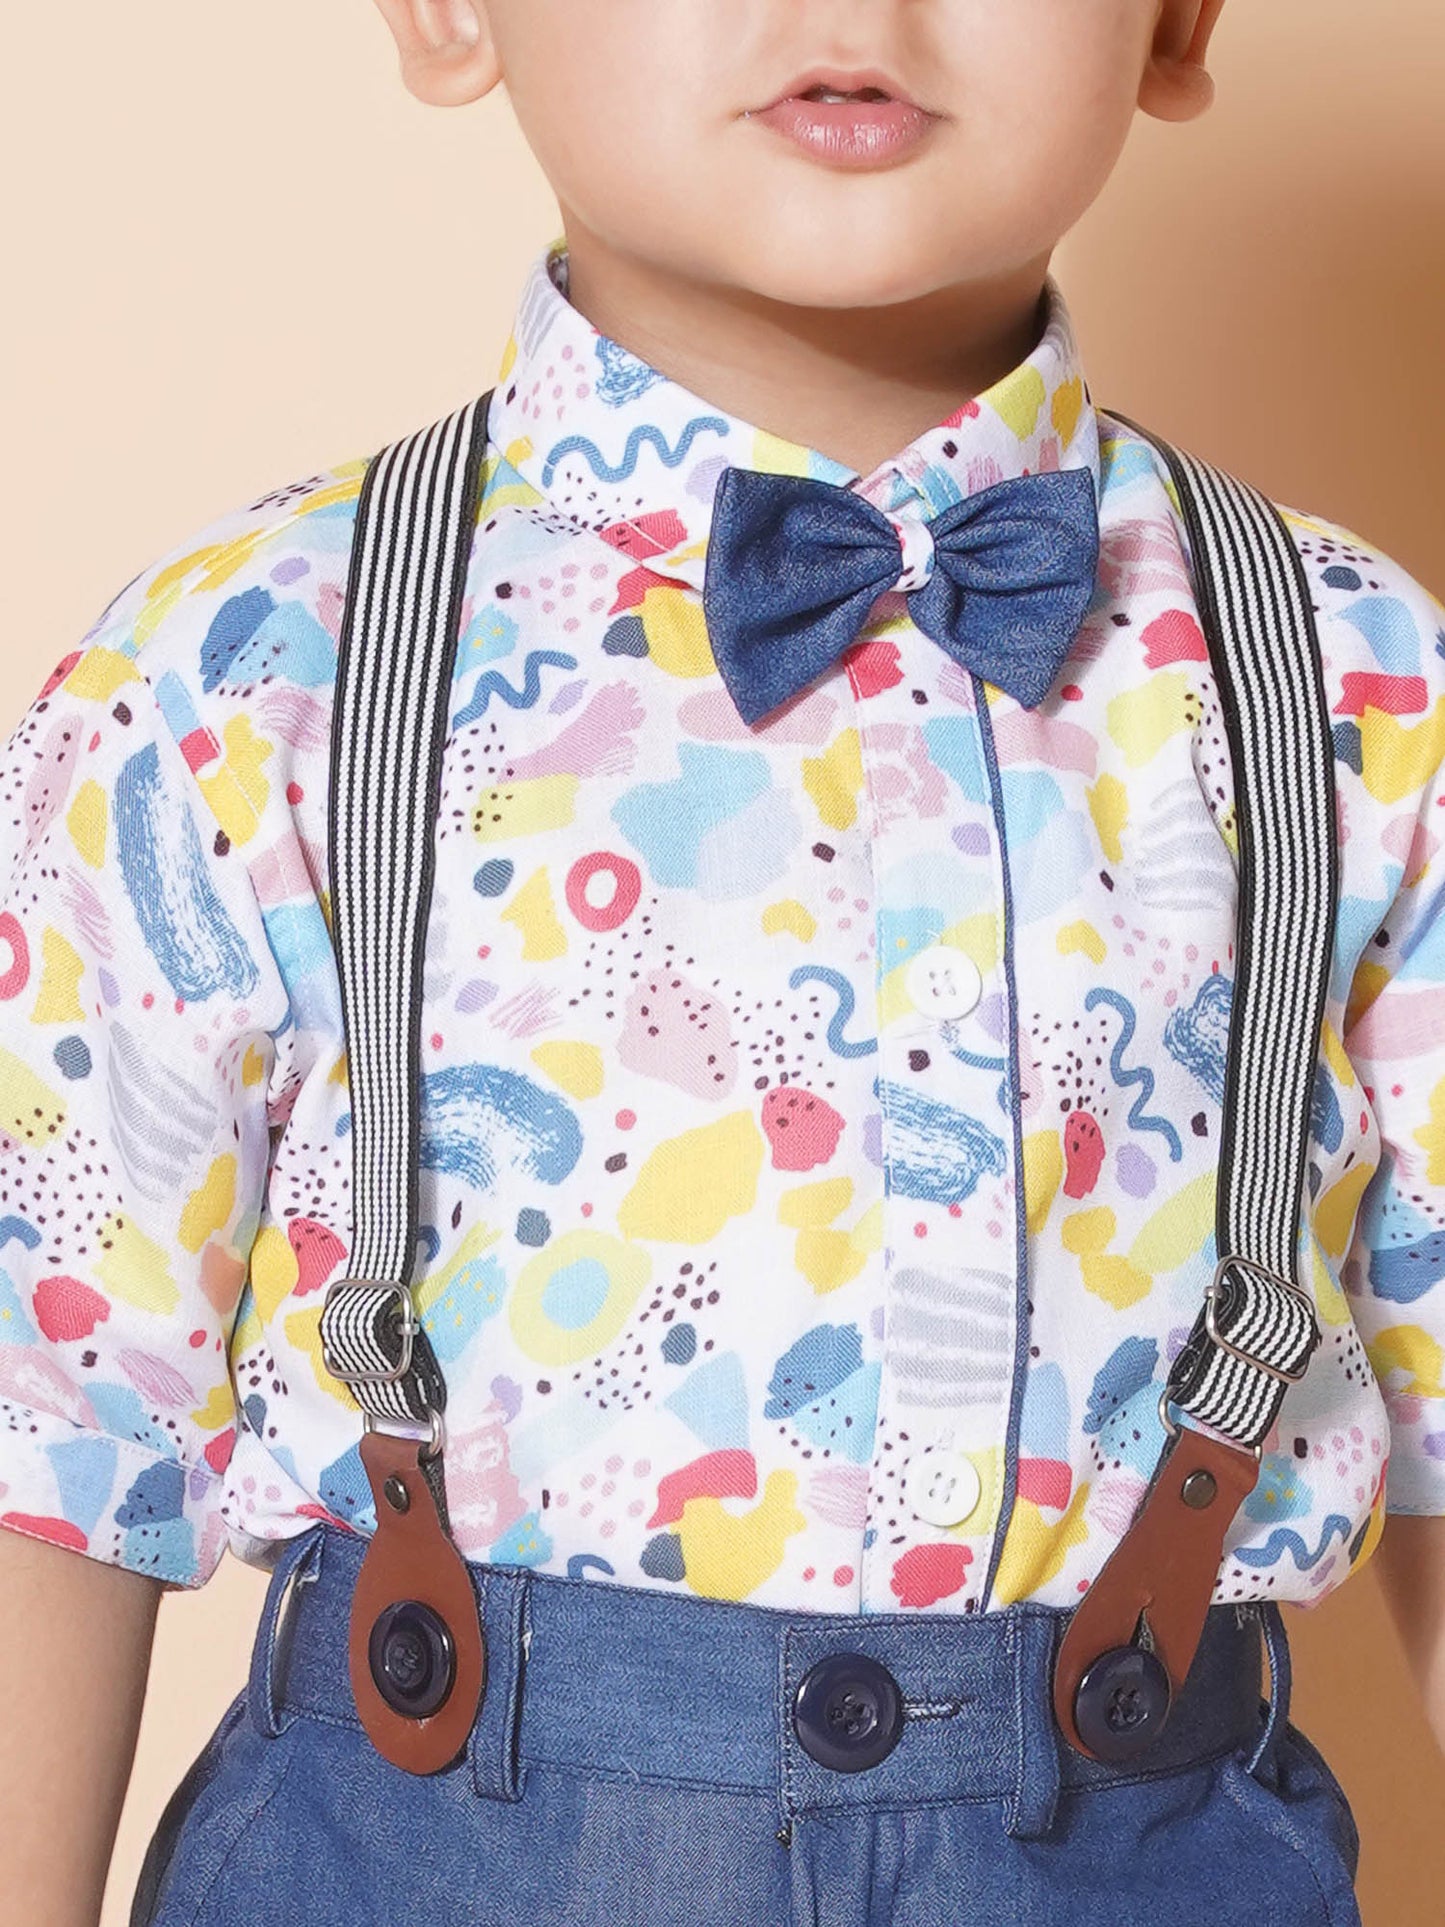 Boys Kids Blue Cotton Printed Shirt Shorts With Cap and Suspender Set